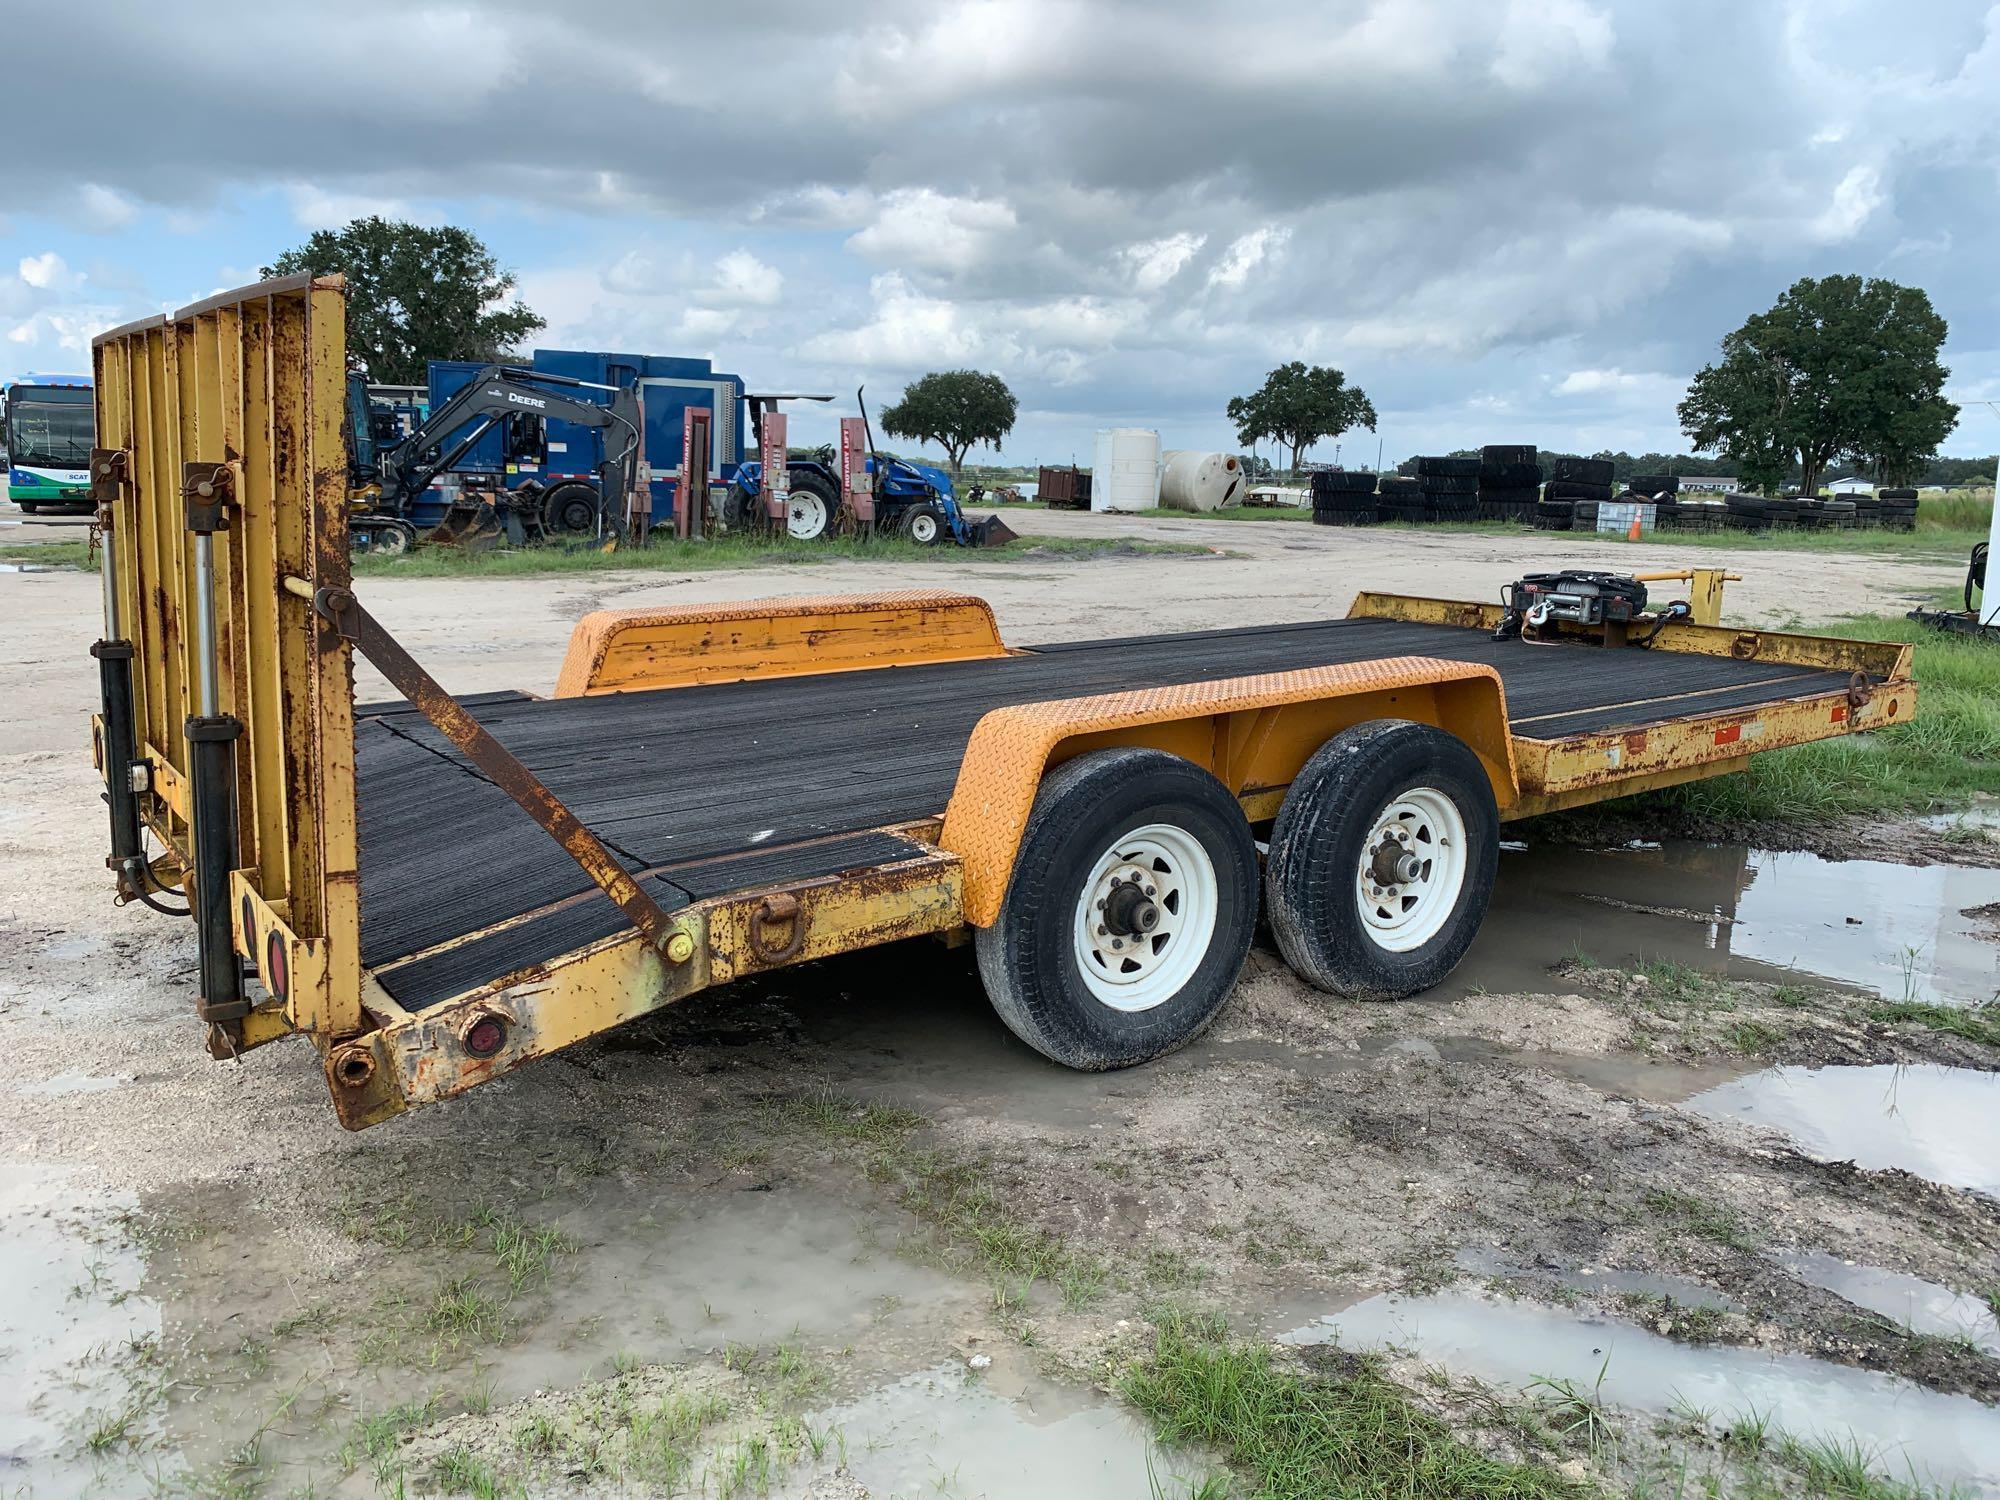 2007 Imperial T/A 18FT Equipment Trailer with Hydraulic Ramps